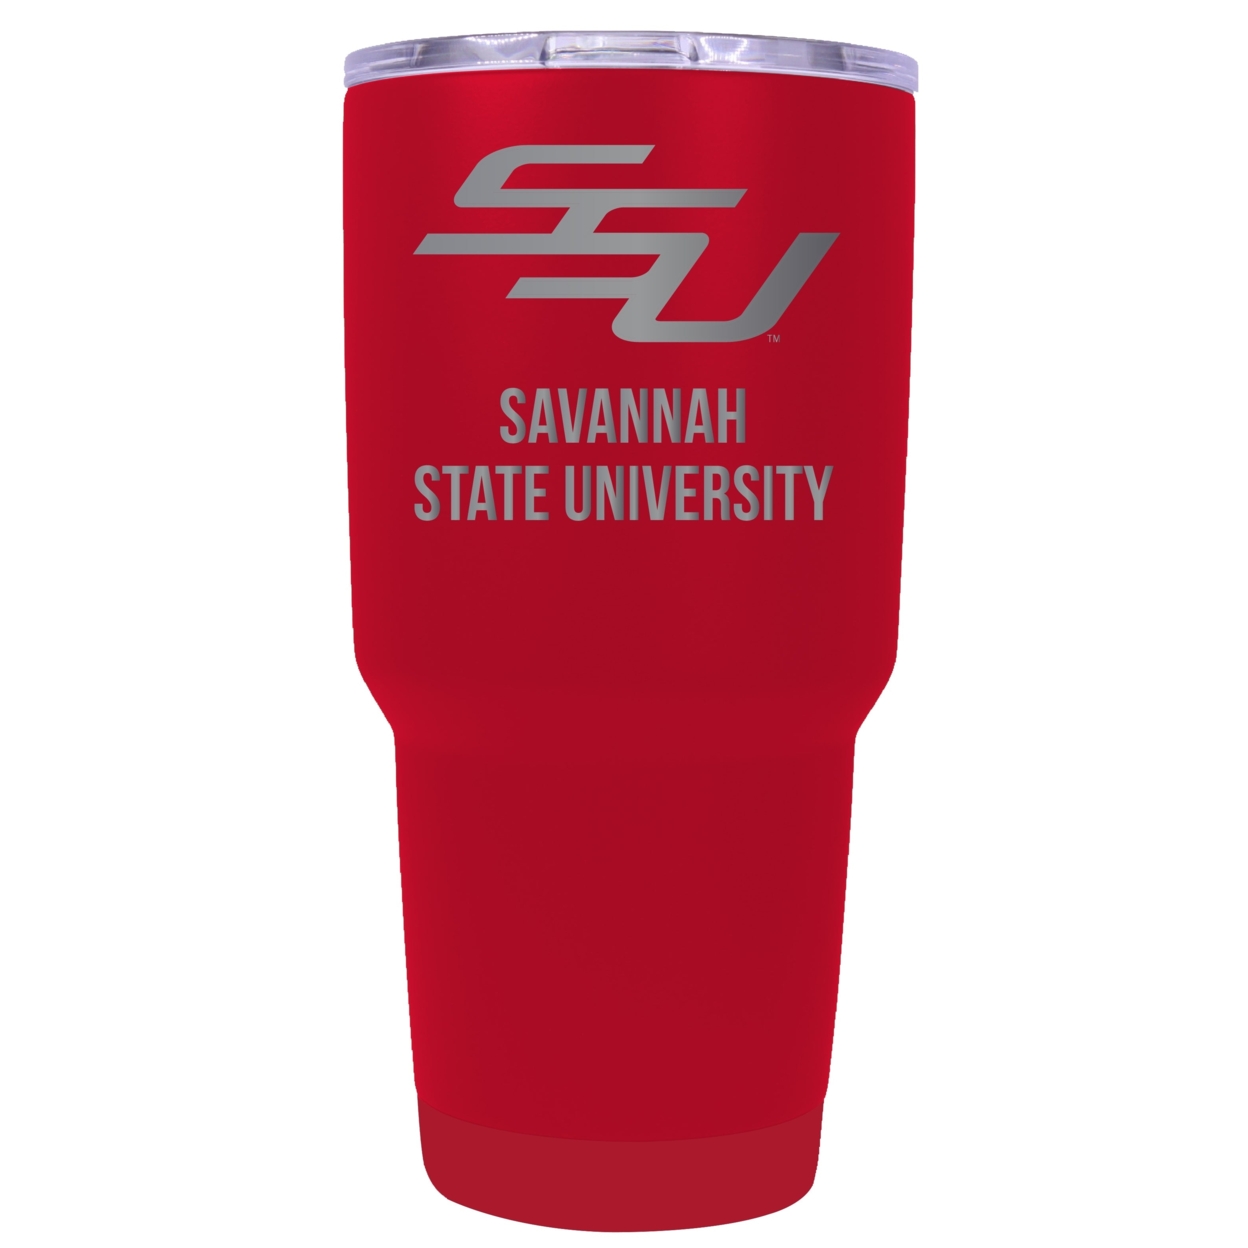 Savannah State University 24 Oz Laser Engraved Stainless Steel Insulated Tumbler - Choose Your Color. - Navy